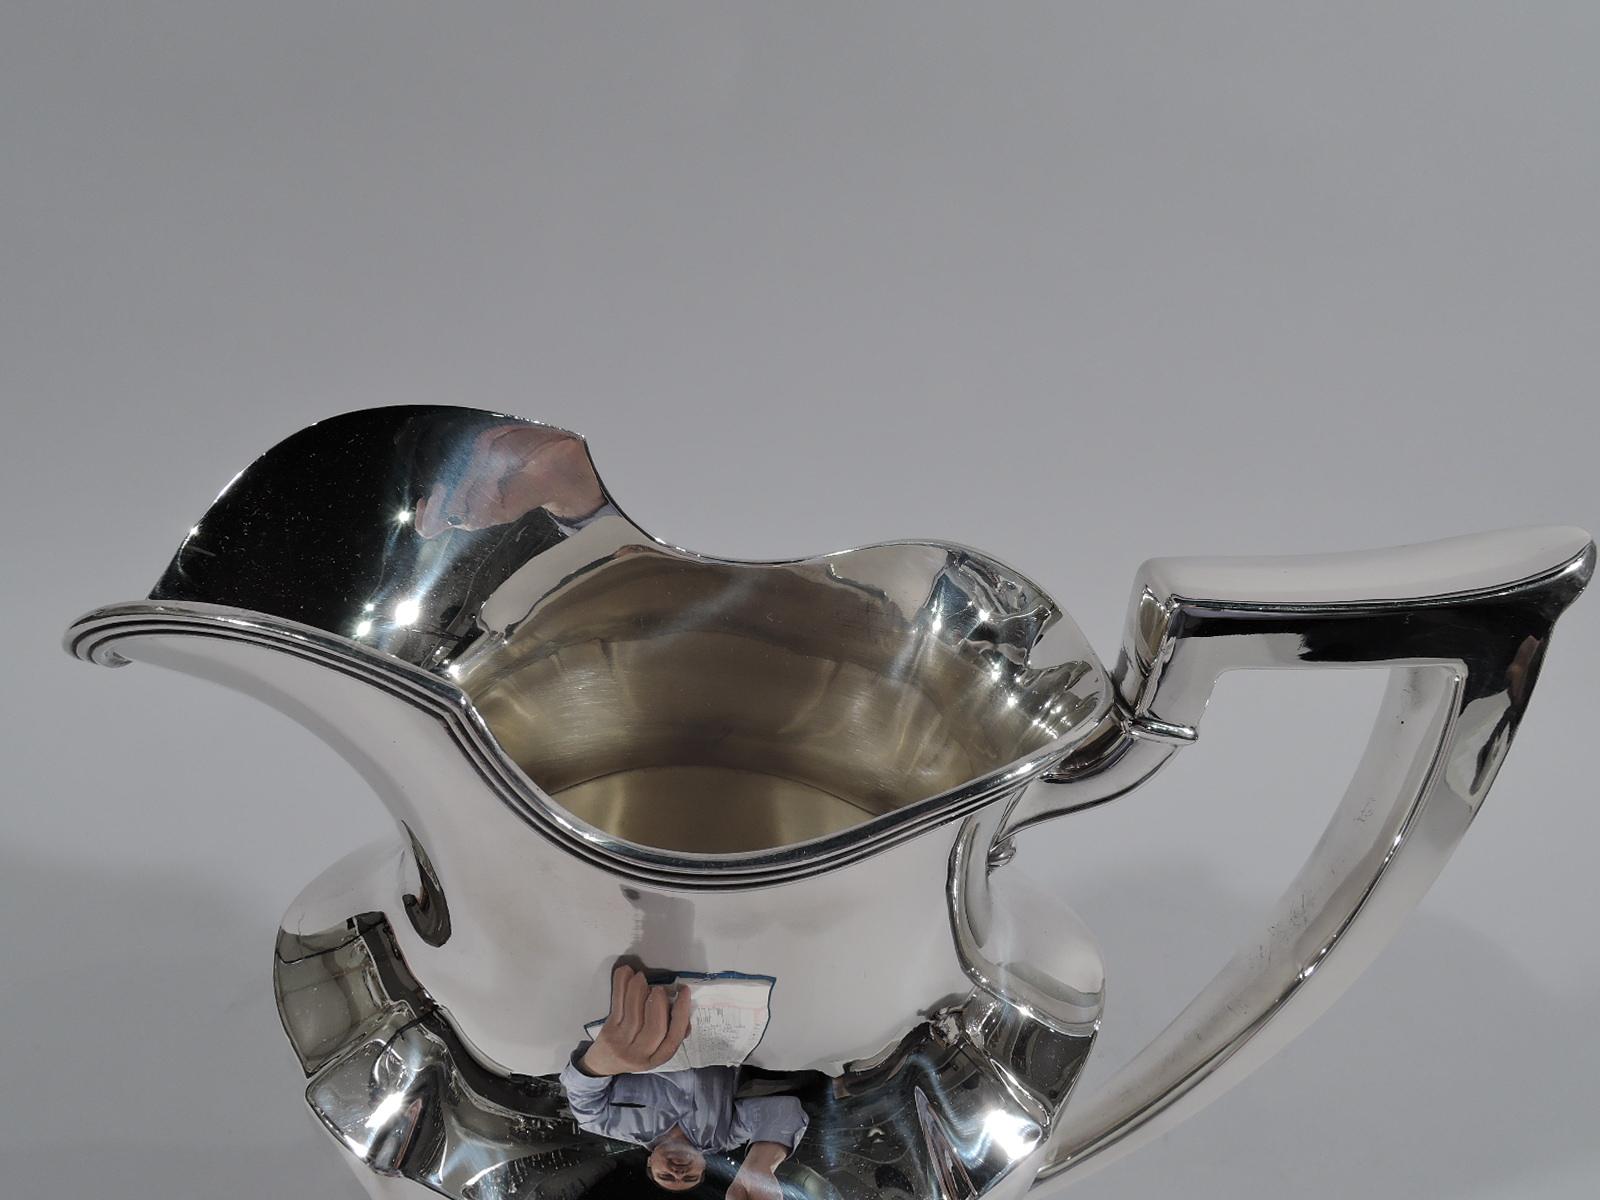 Plymouth sterling silver water pitcher. Made by Gorham in Providence in 1931. Tapering and paneled ovoid body, reeded helmet mouth, capped scroll bracket handle, and stepped oval foot. A fine piece in the Classic Art Deco pattern. Fully marked